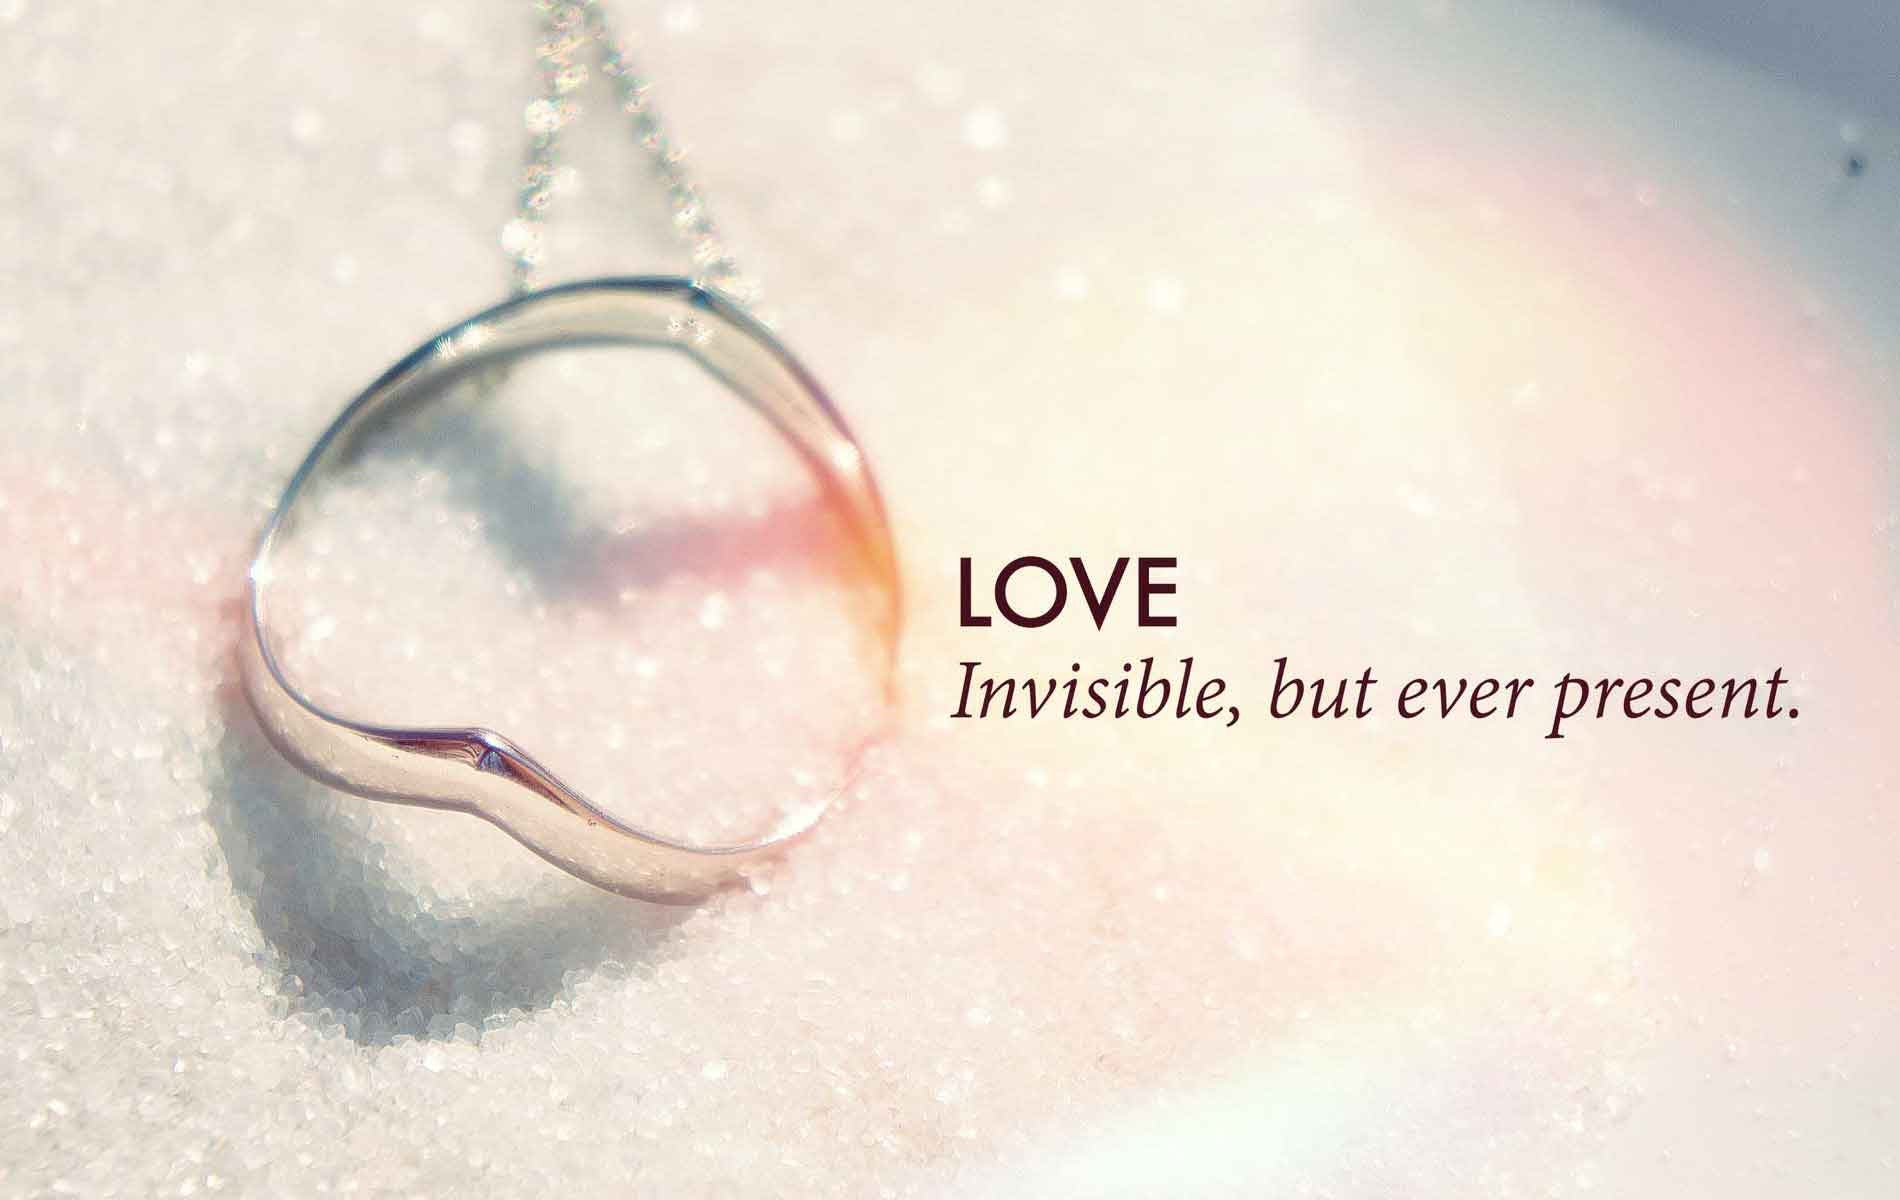 Love is invisible, but ever present.